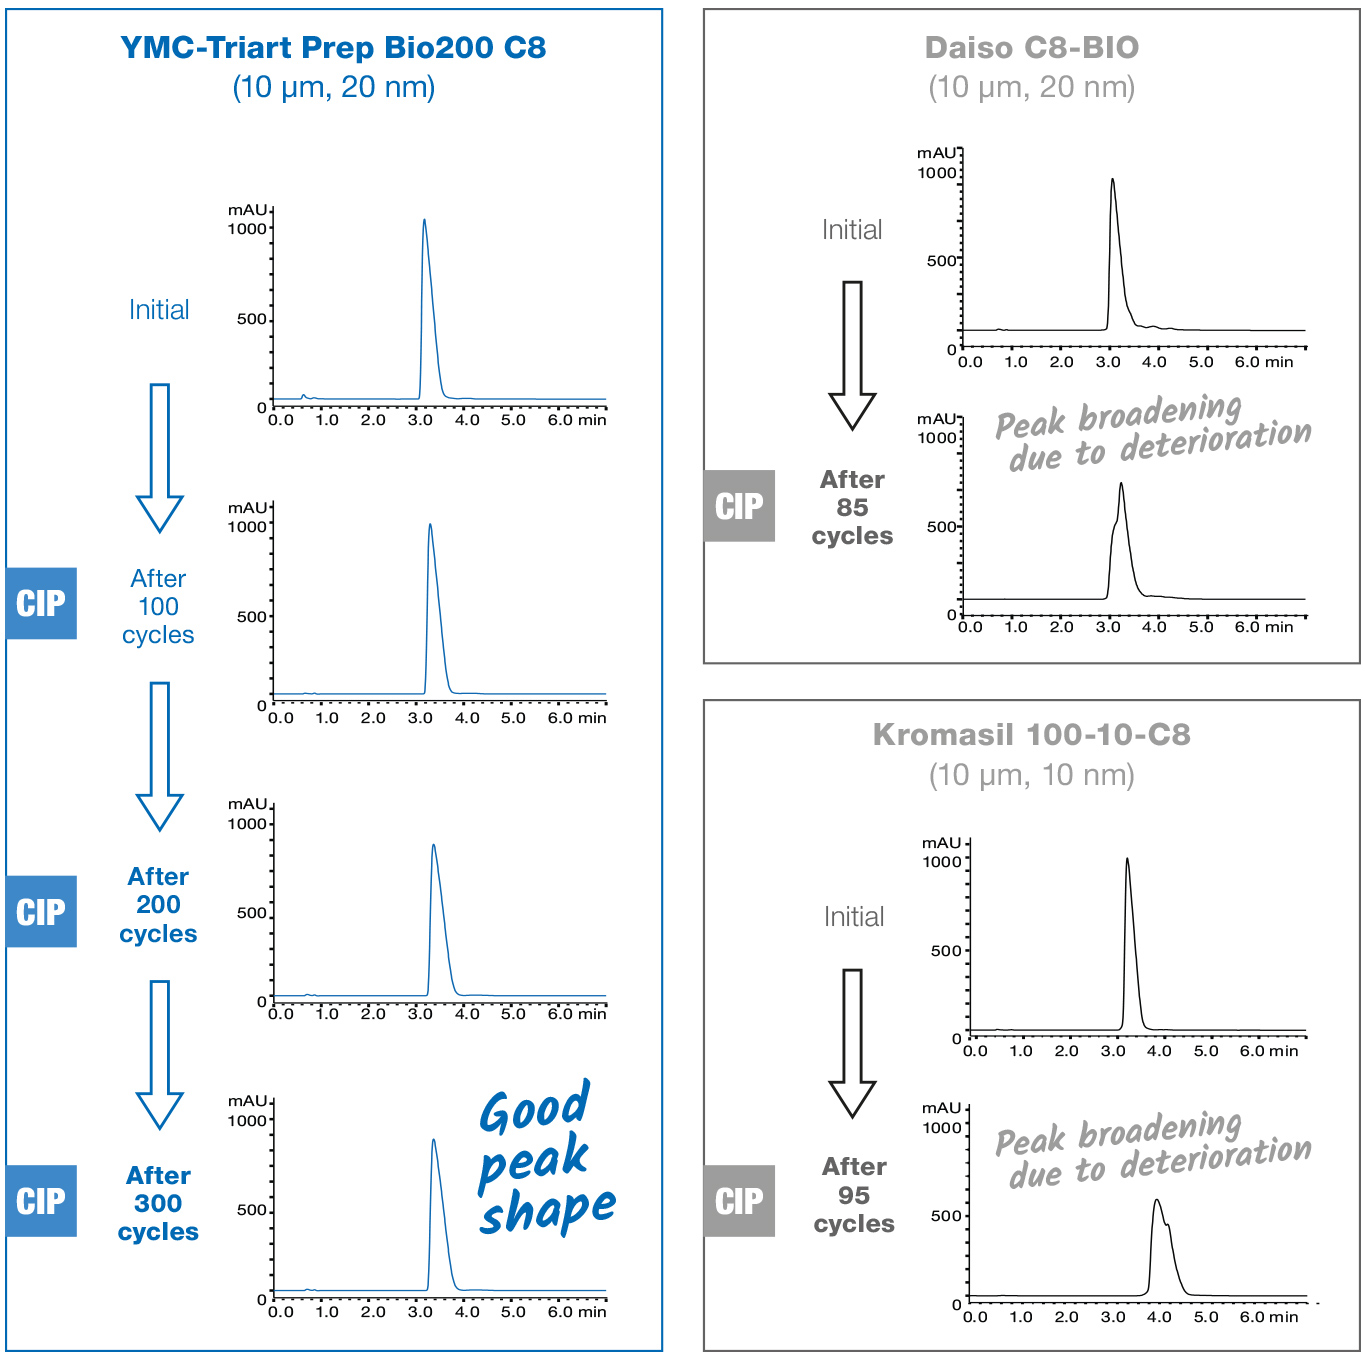 The image shows the high stability of the RP stationary phase YMC-Triart Prep Bio200 C8 towards alkaline CIP-procedures with 0.1 M NaOH compared with alternative material.